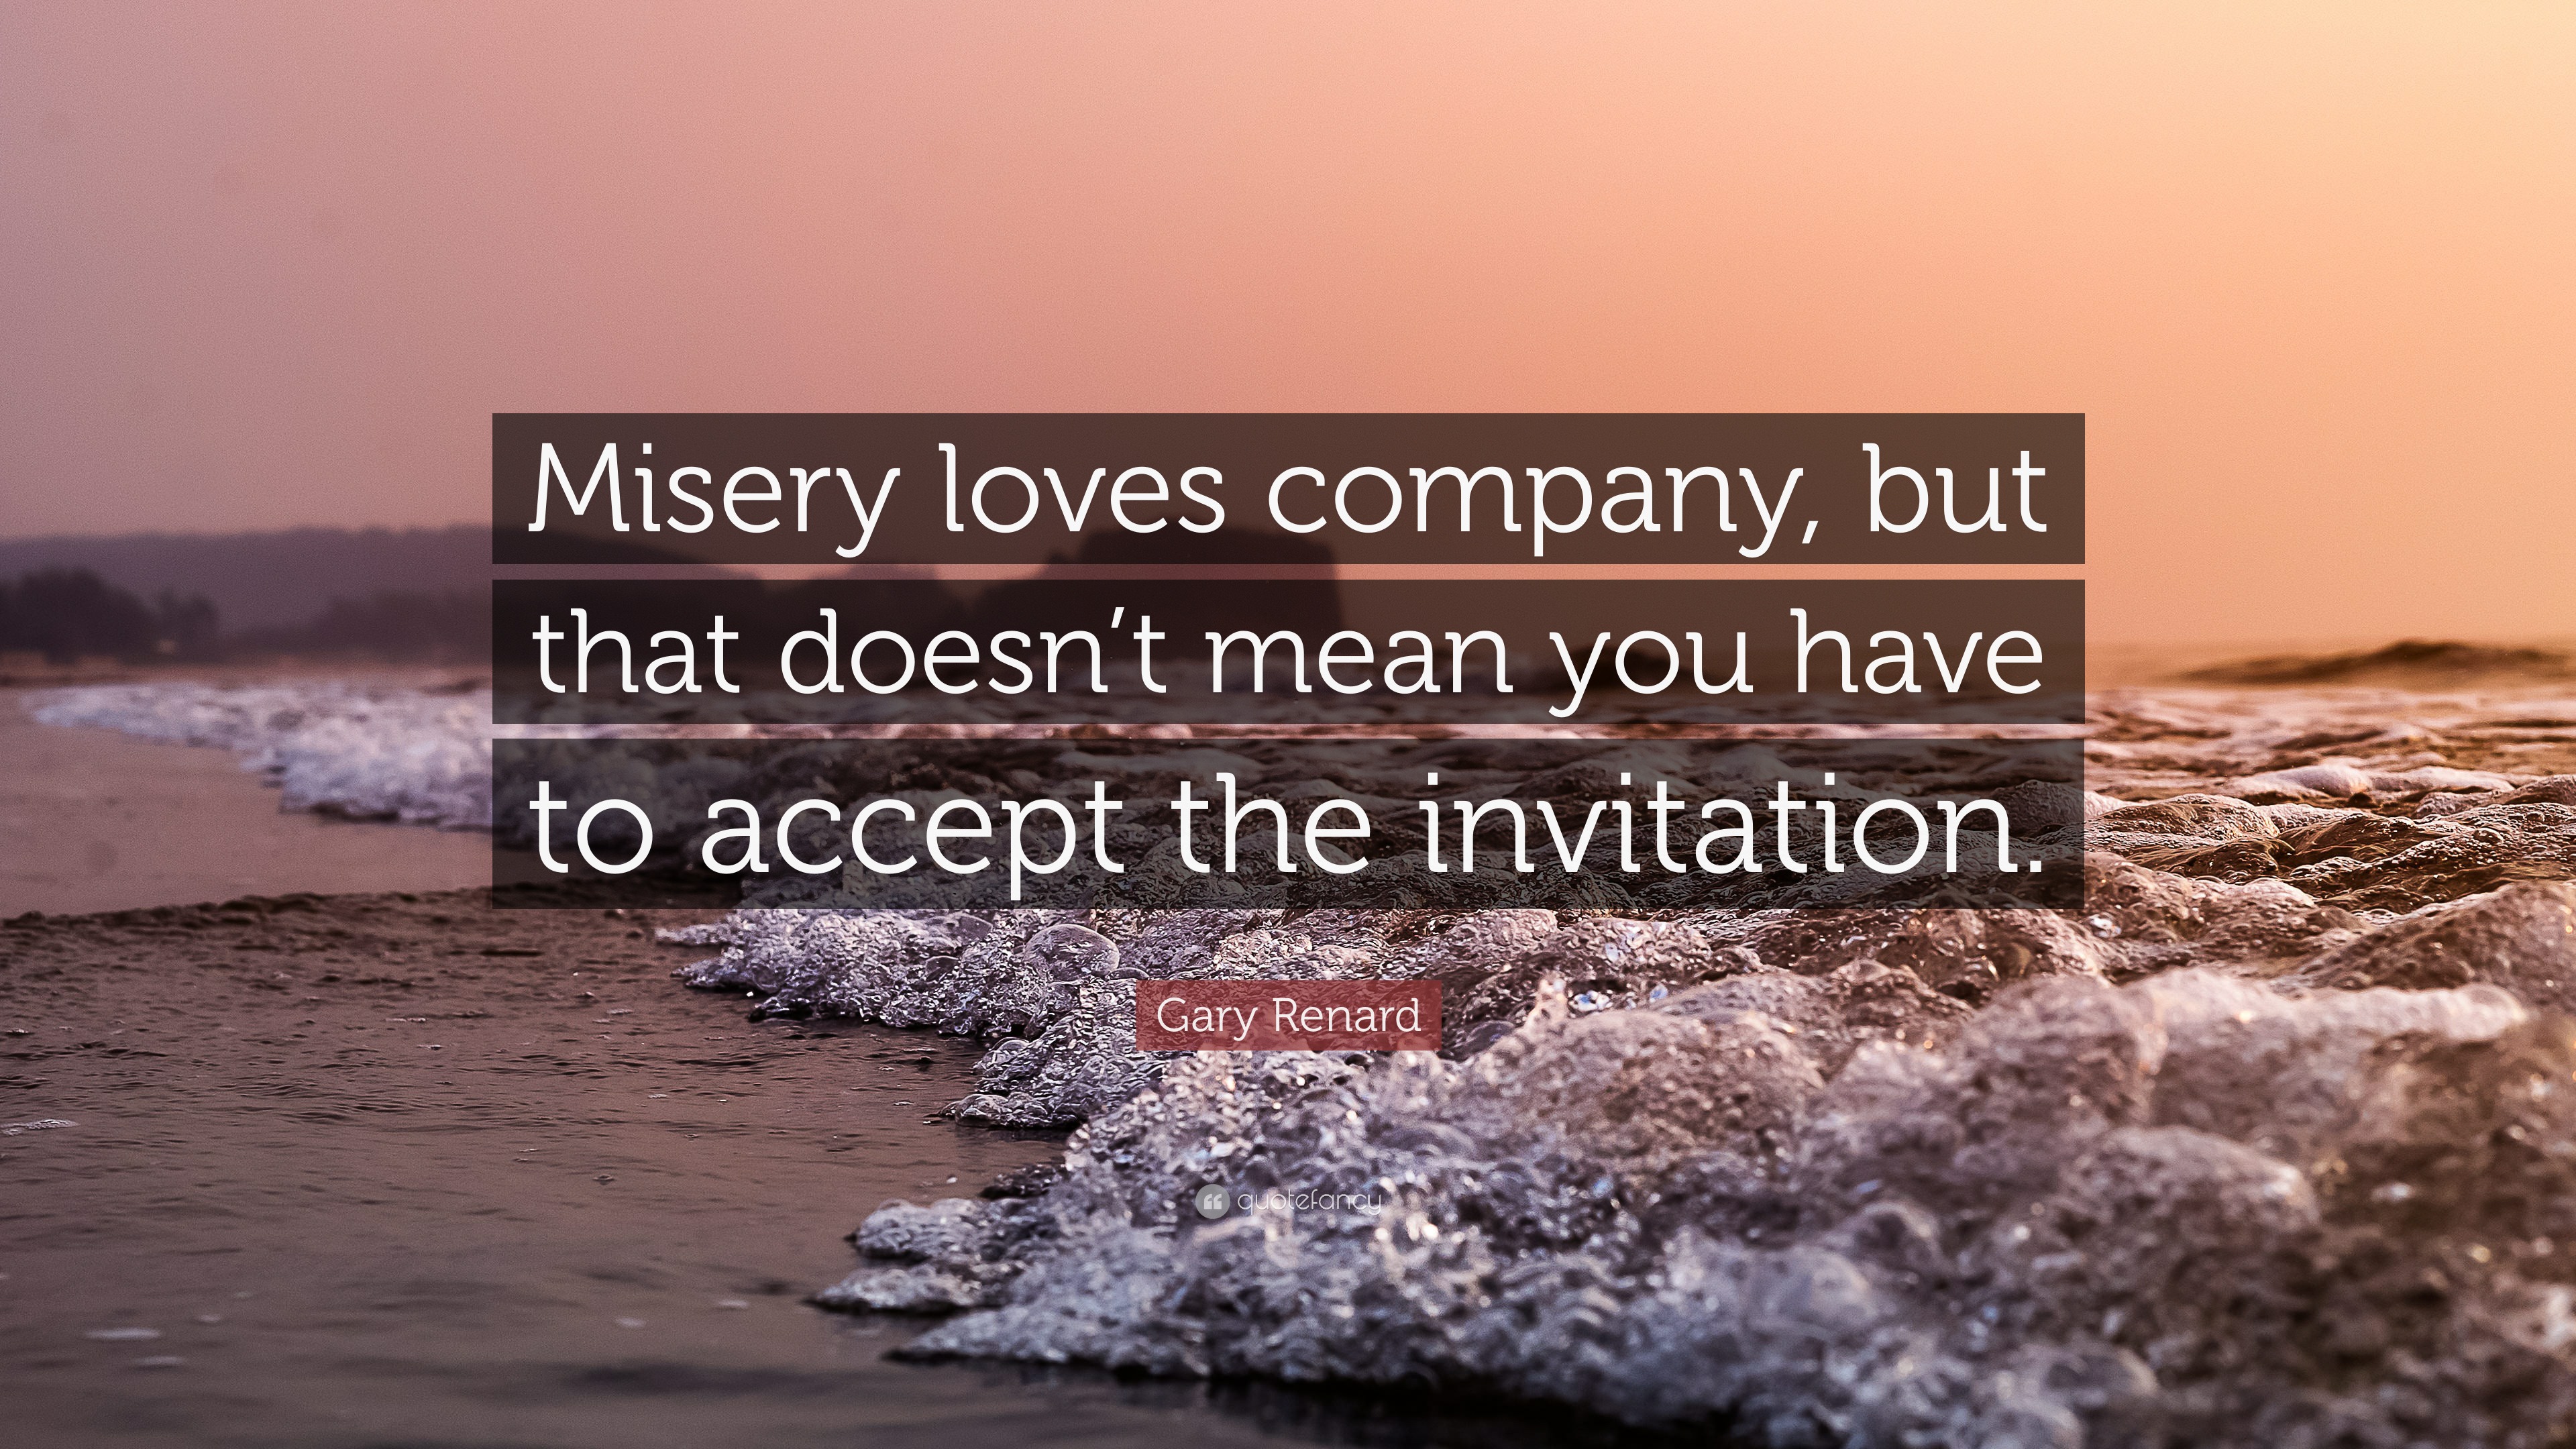 Misery loves company, but that doesn’t mean you have to accept the invitati...